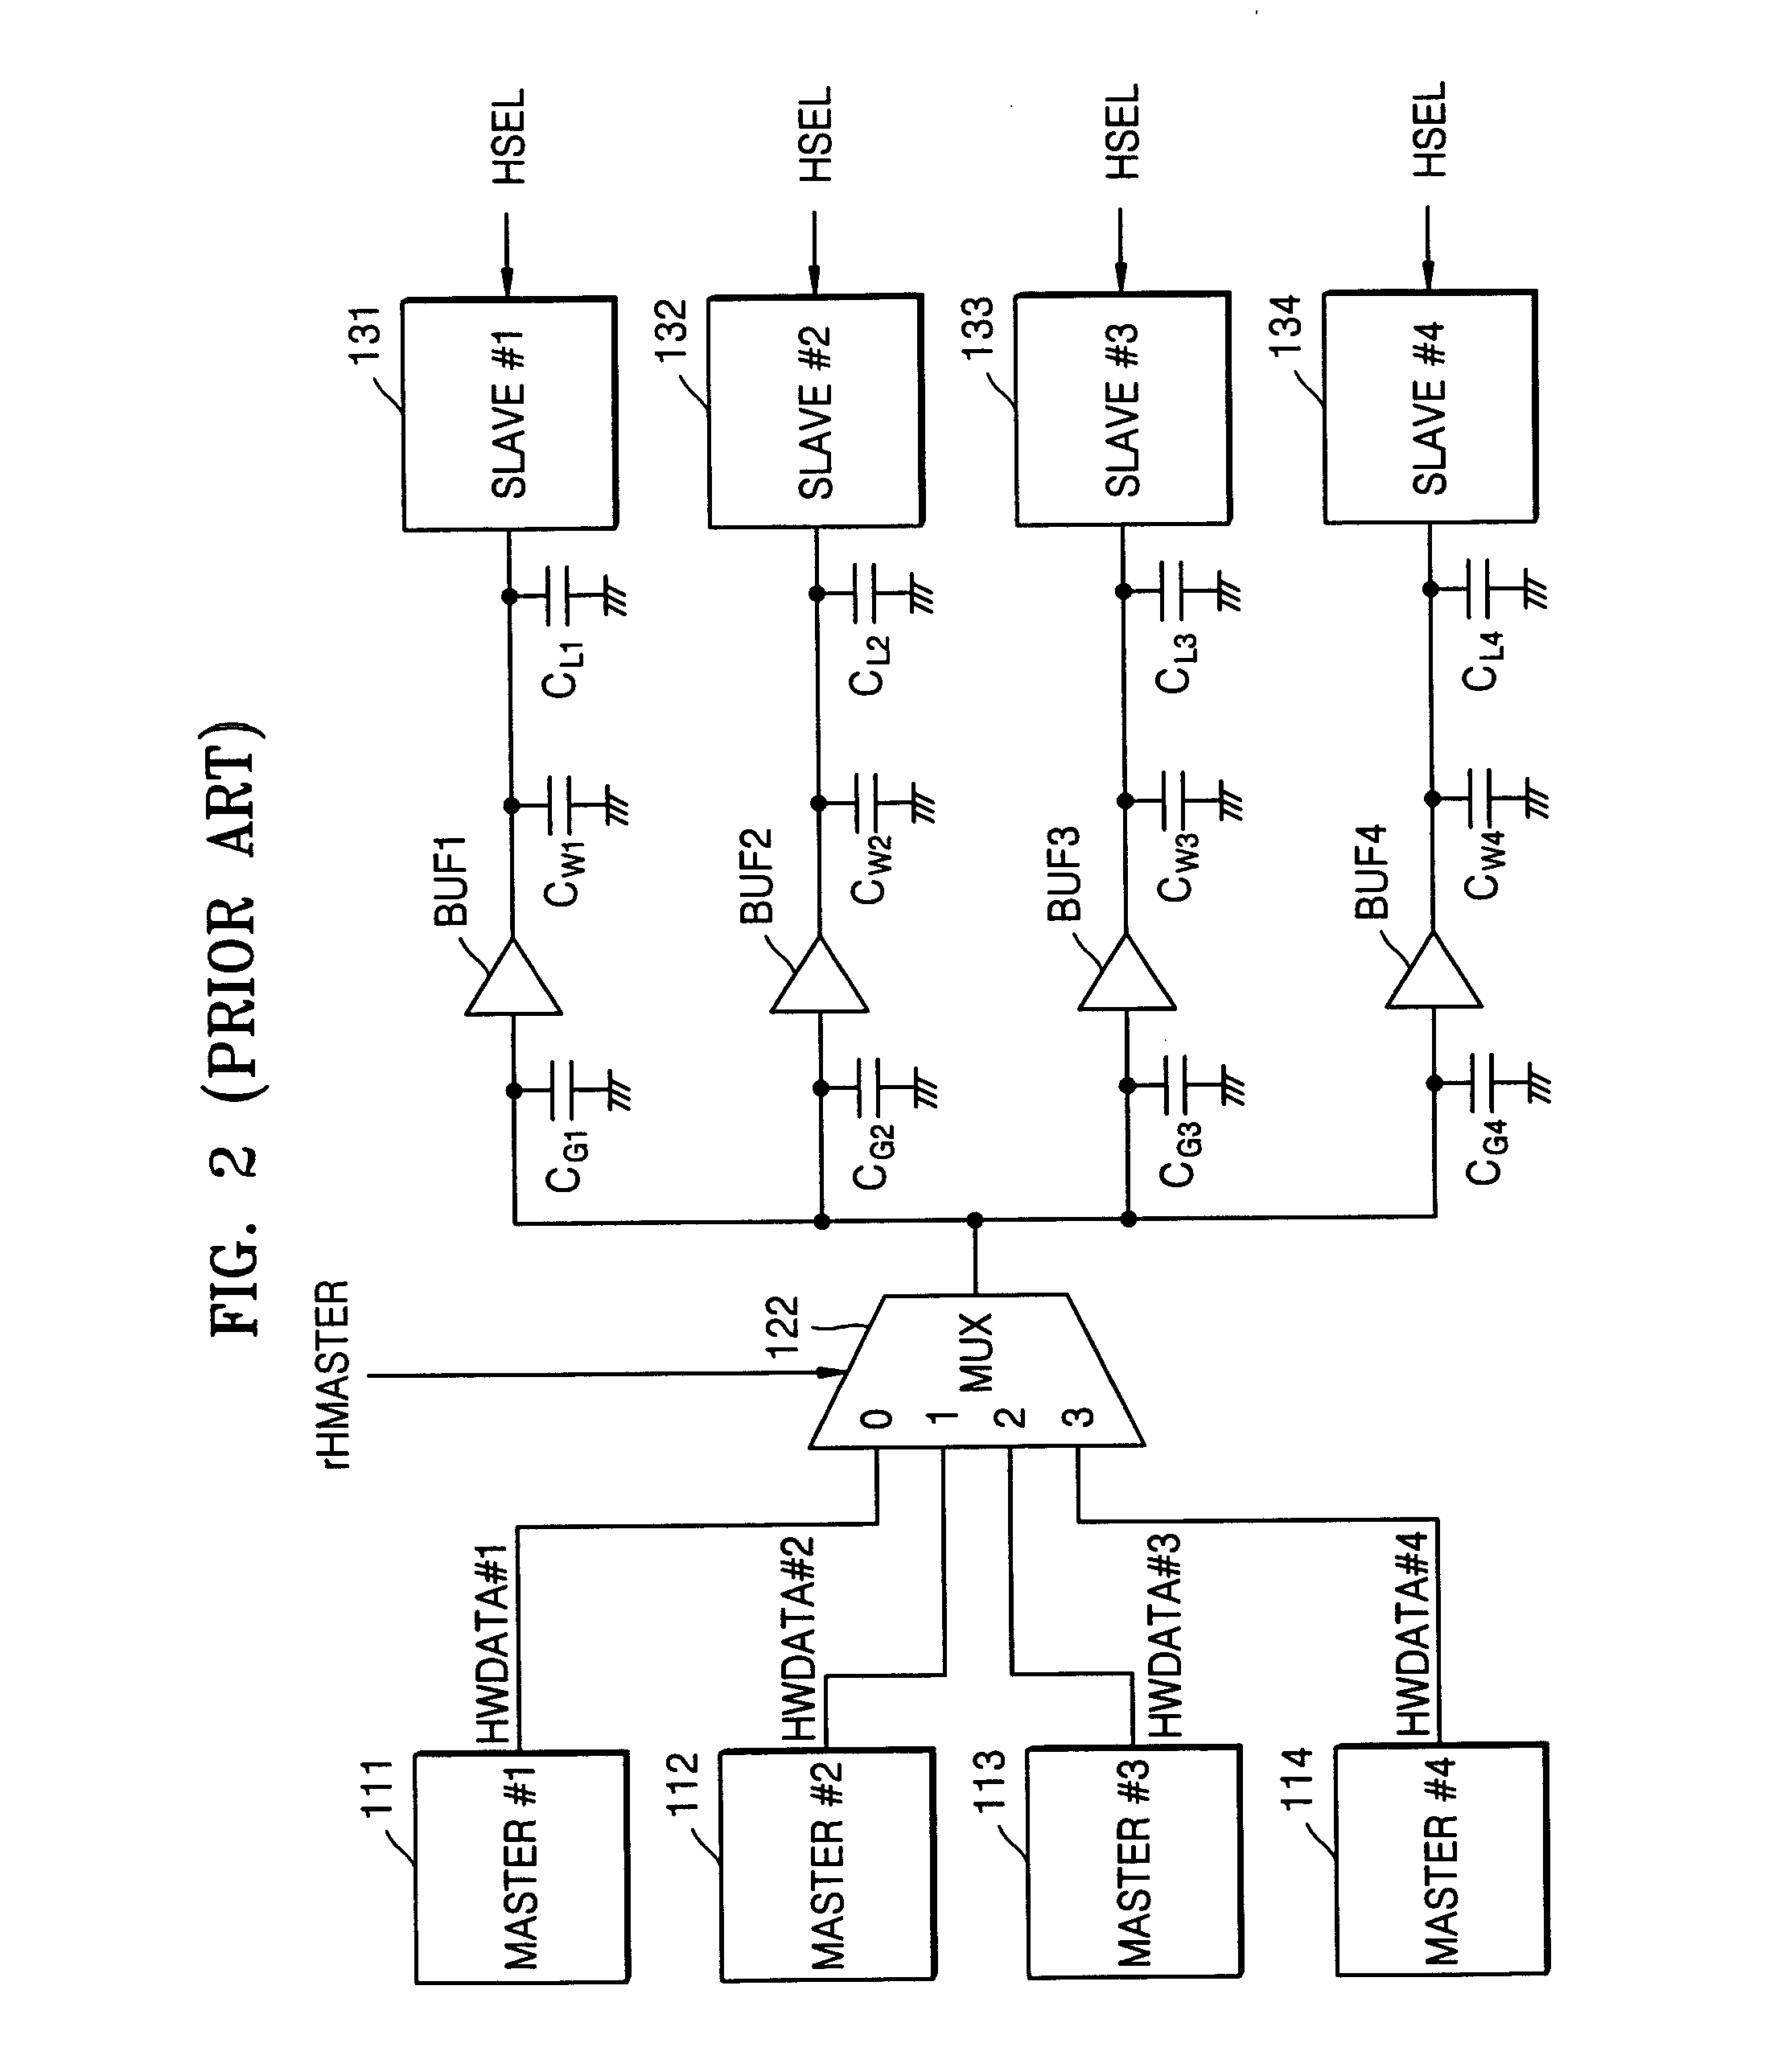 Advanced microcontroller bus architecture (AMBA) system with reduced power consumption and method of driving AMBA system